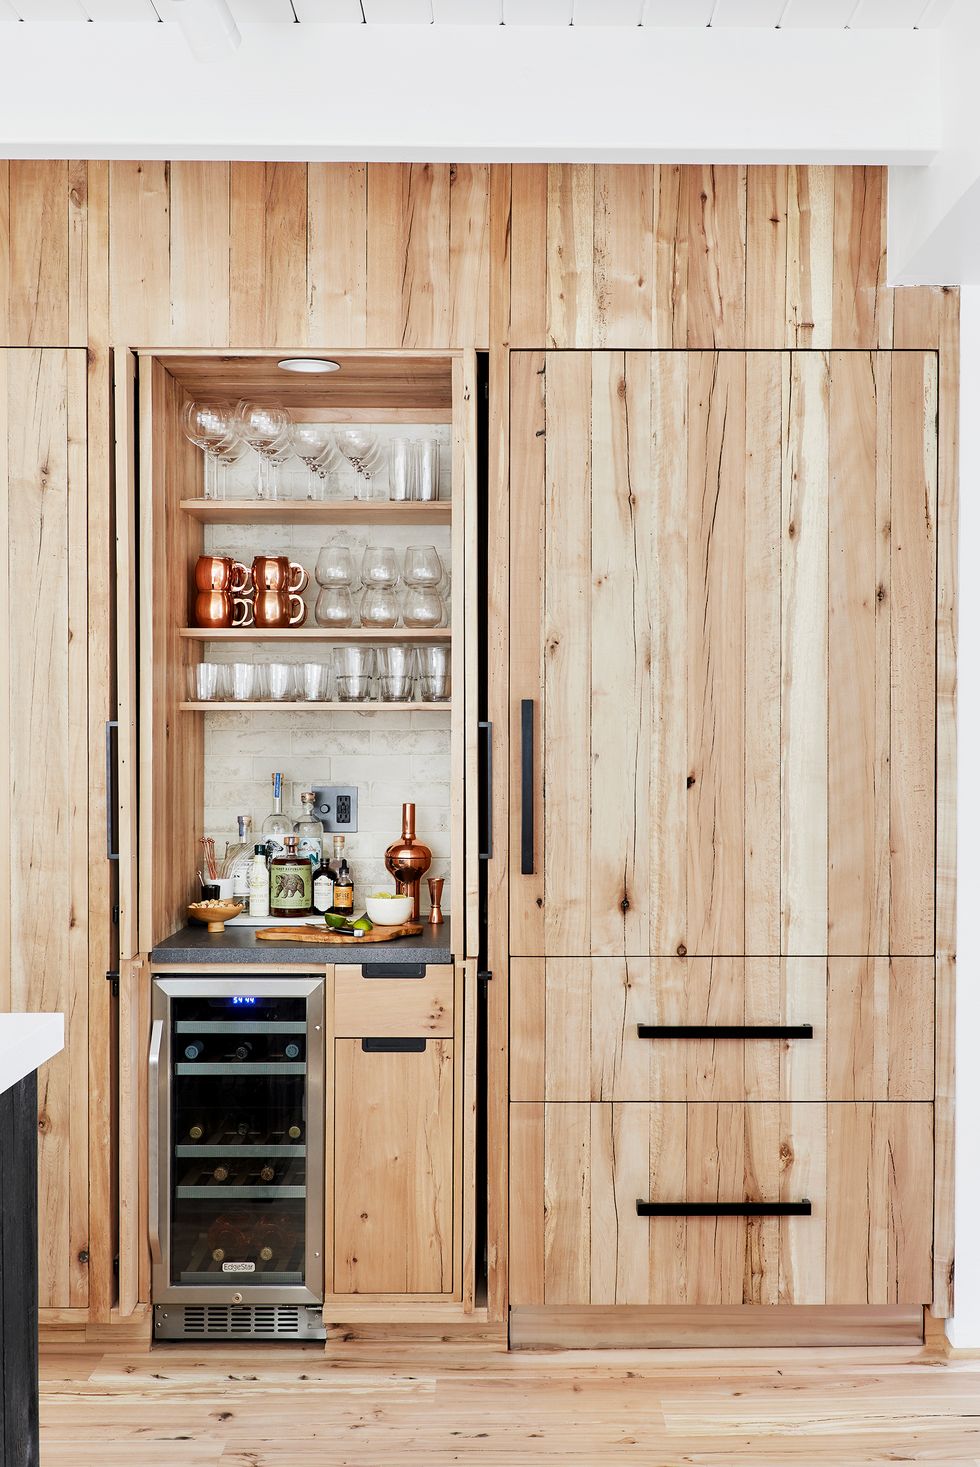 31 Inspiring Coffee Bar Ideas for Small Spaces